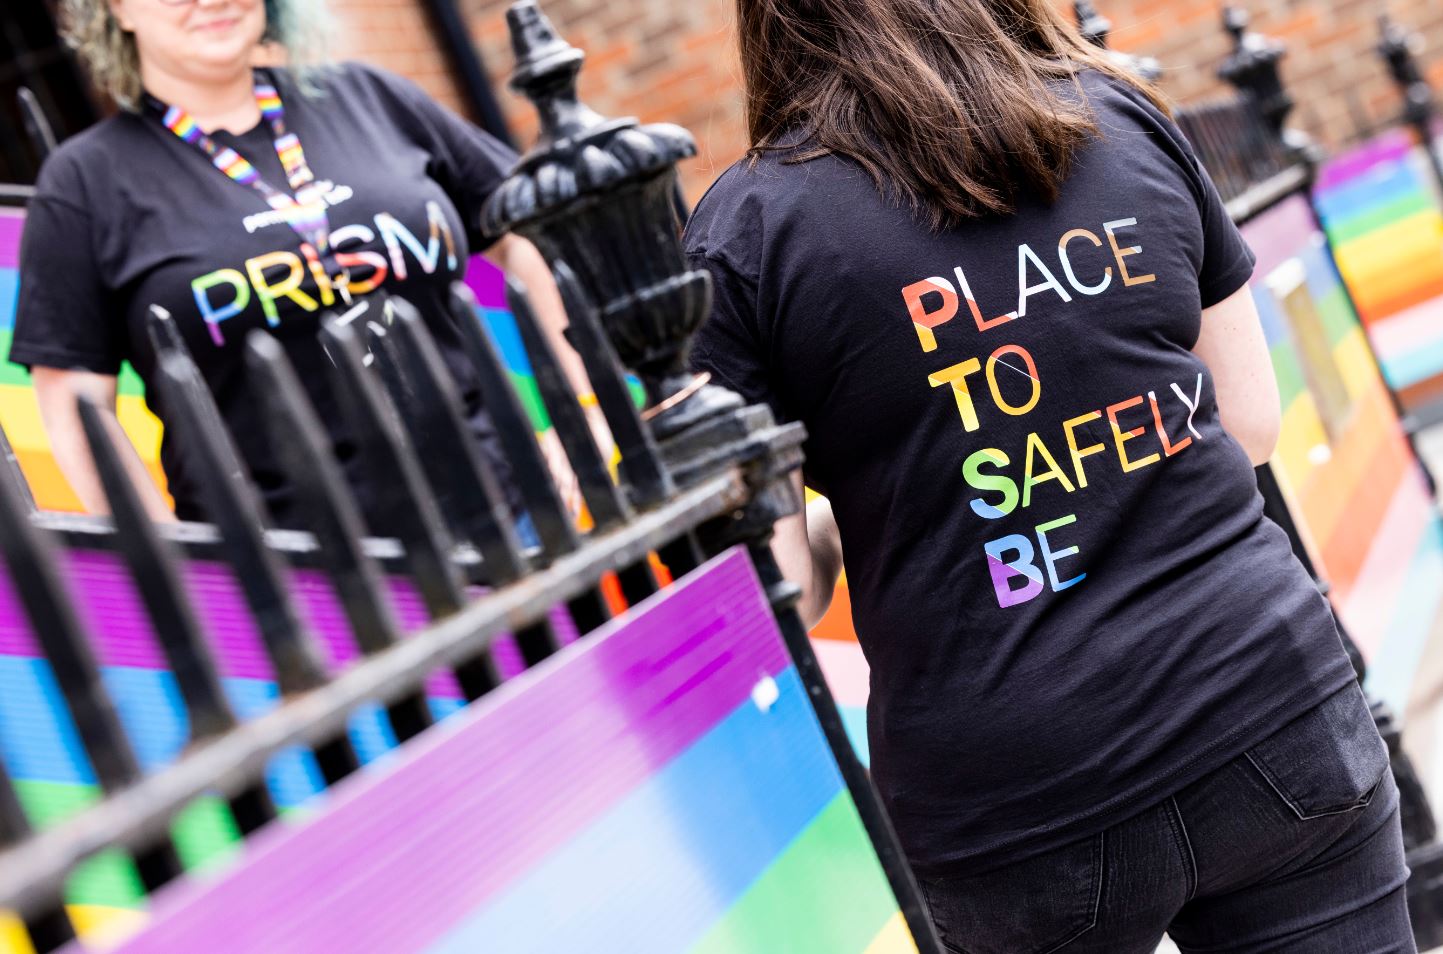 Our Commitment to Diversity and Inclusion – A Focus on LGBTQ+